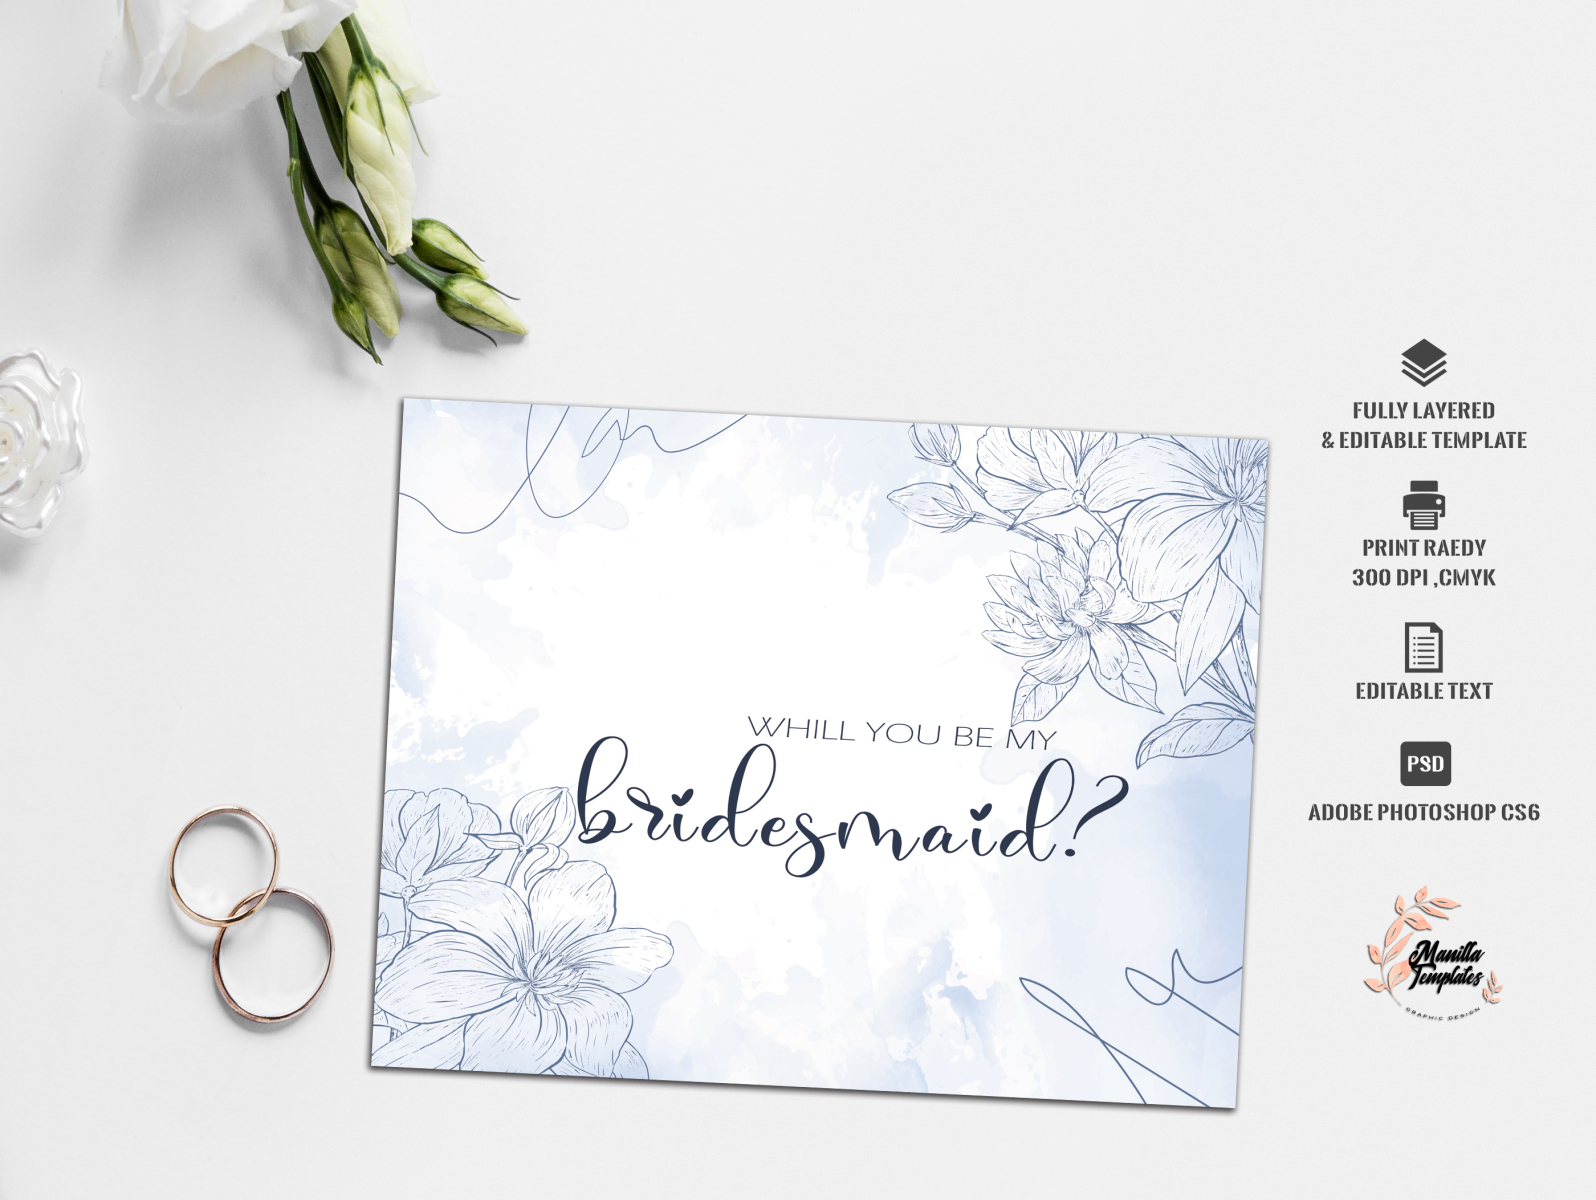 Bridesmaid Proposal Card template by Manilla Designs on Dribbble